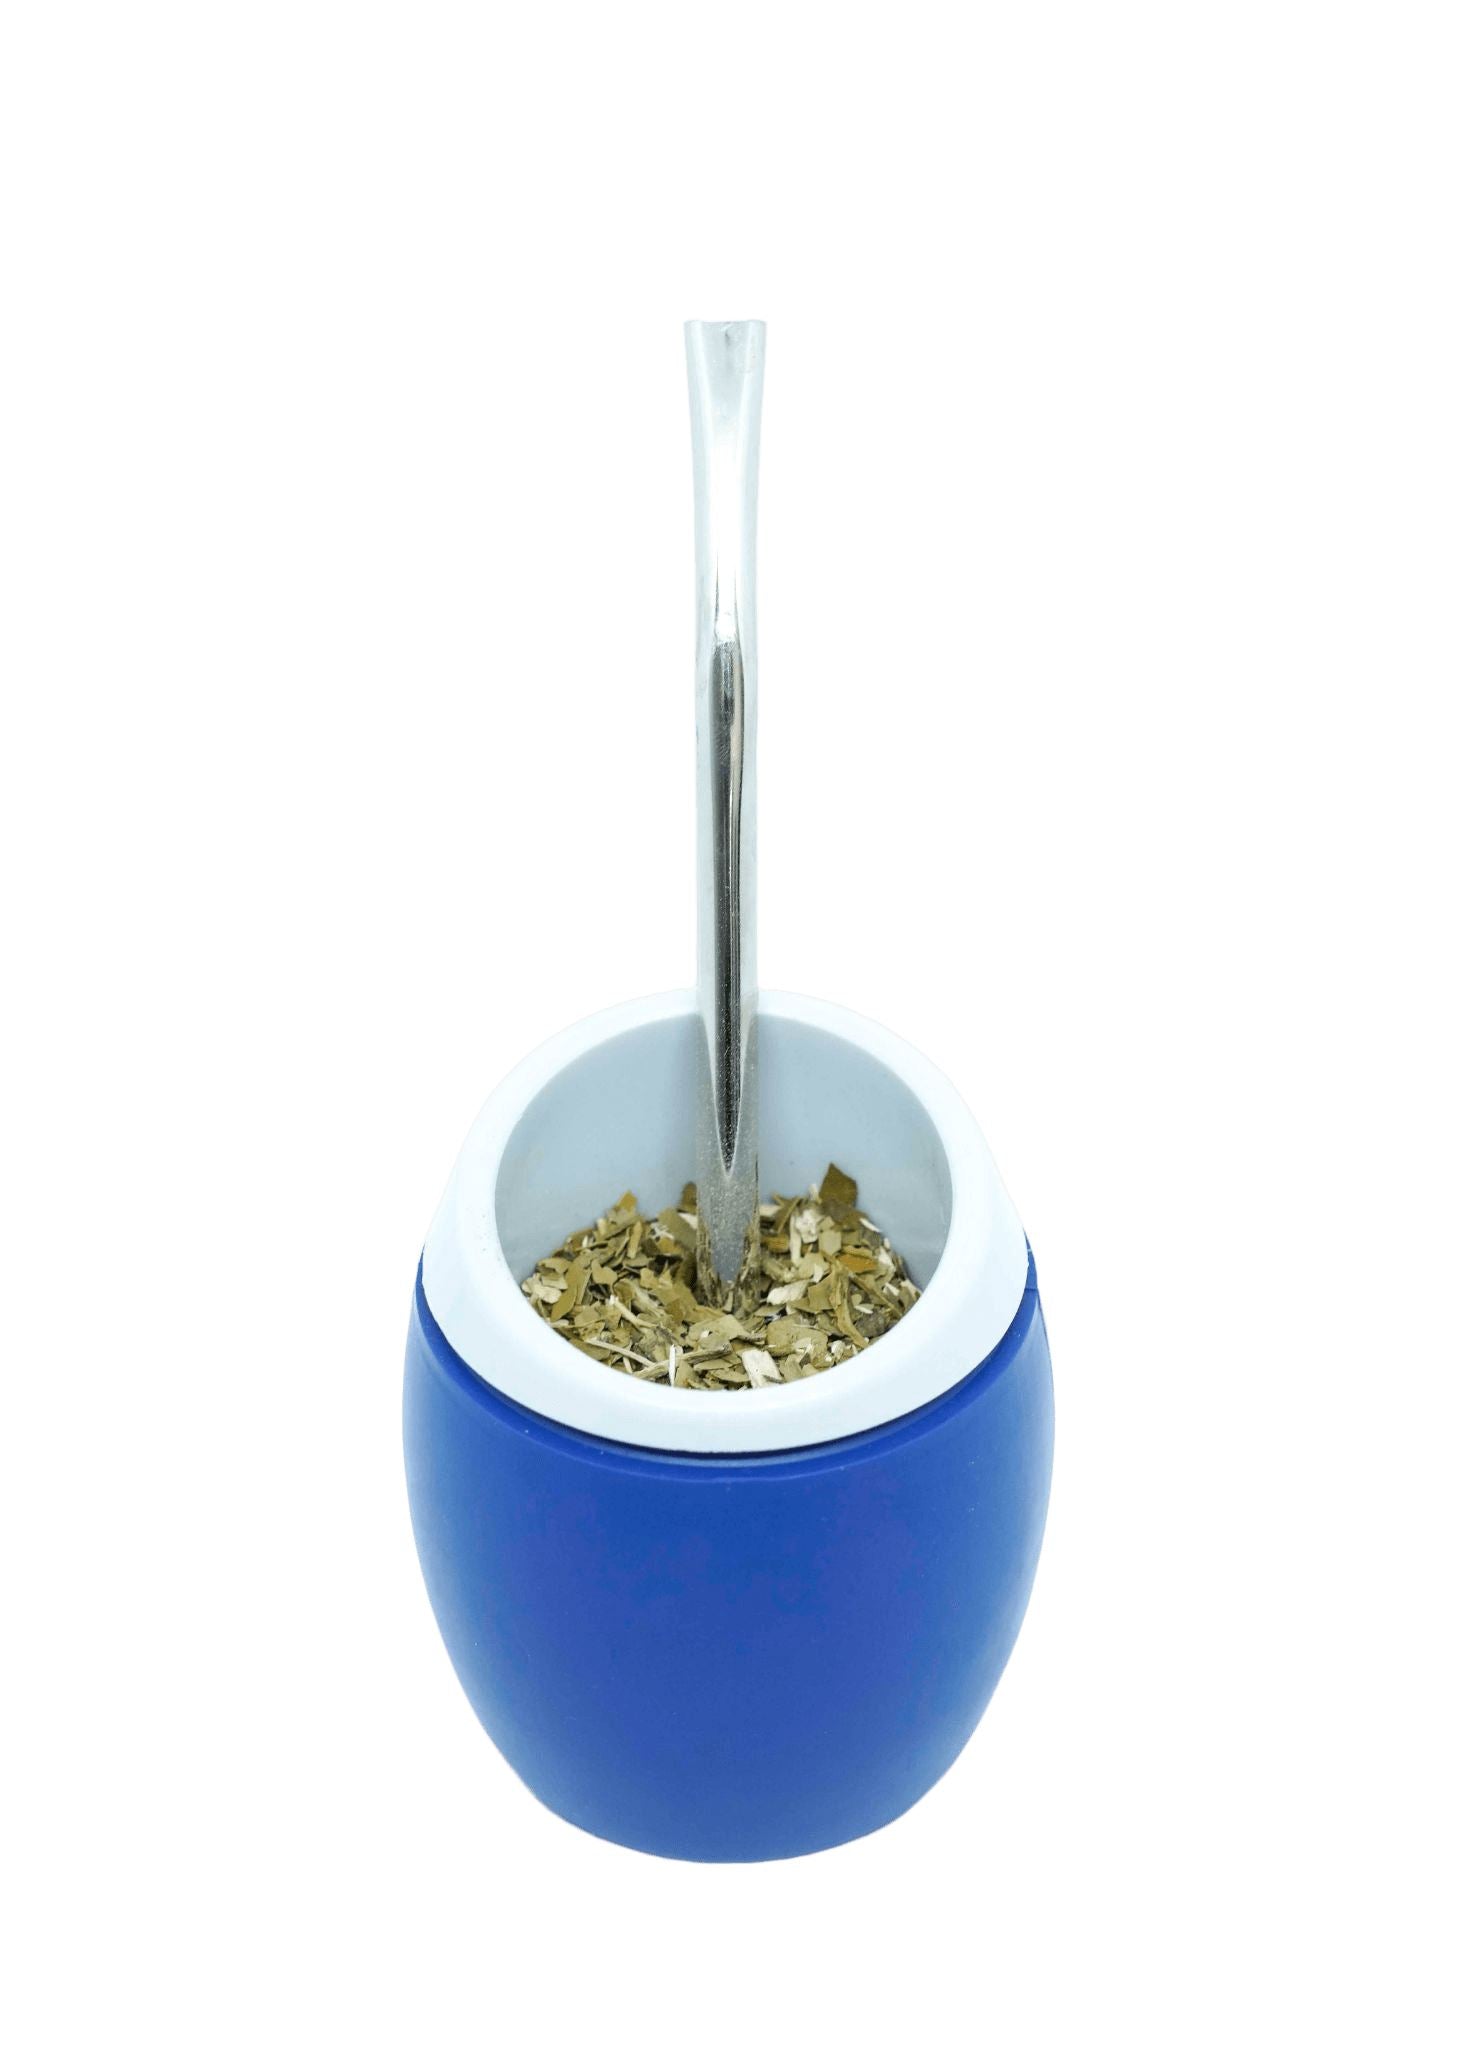 Nelo Mate Gourd with Self-extracting Straw - Blue (Mate and Bombilla) Mates Hispanic Pantry 